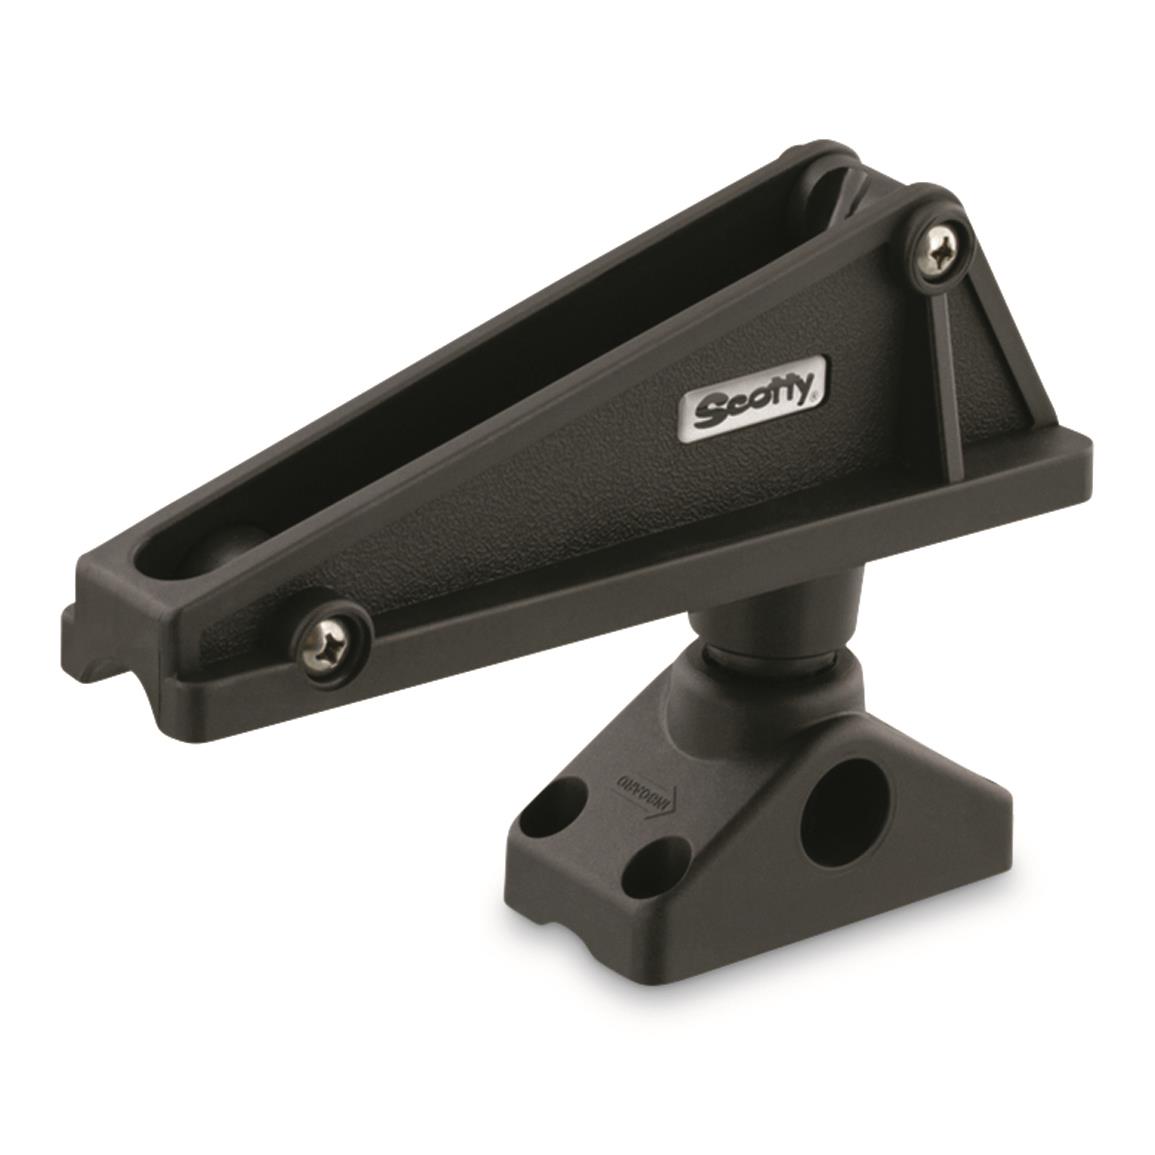 Scotty Anchor Lock with 0241 Side / Deck Mount